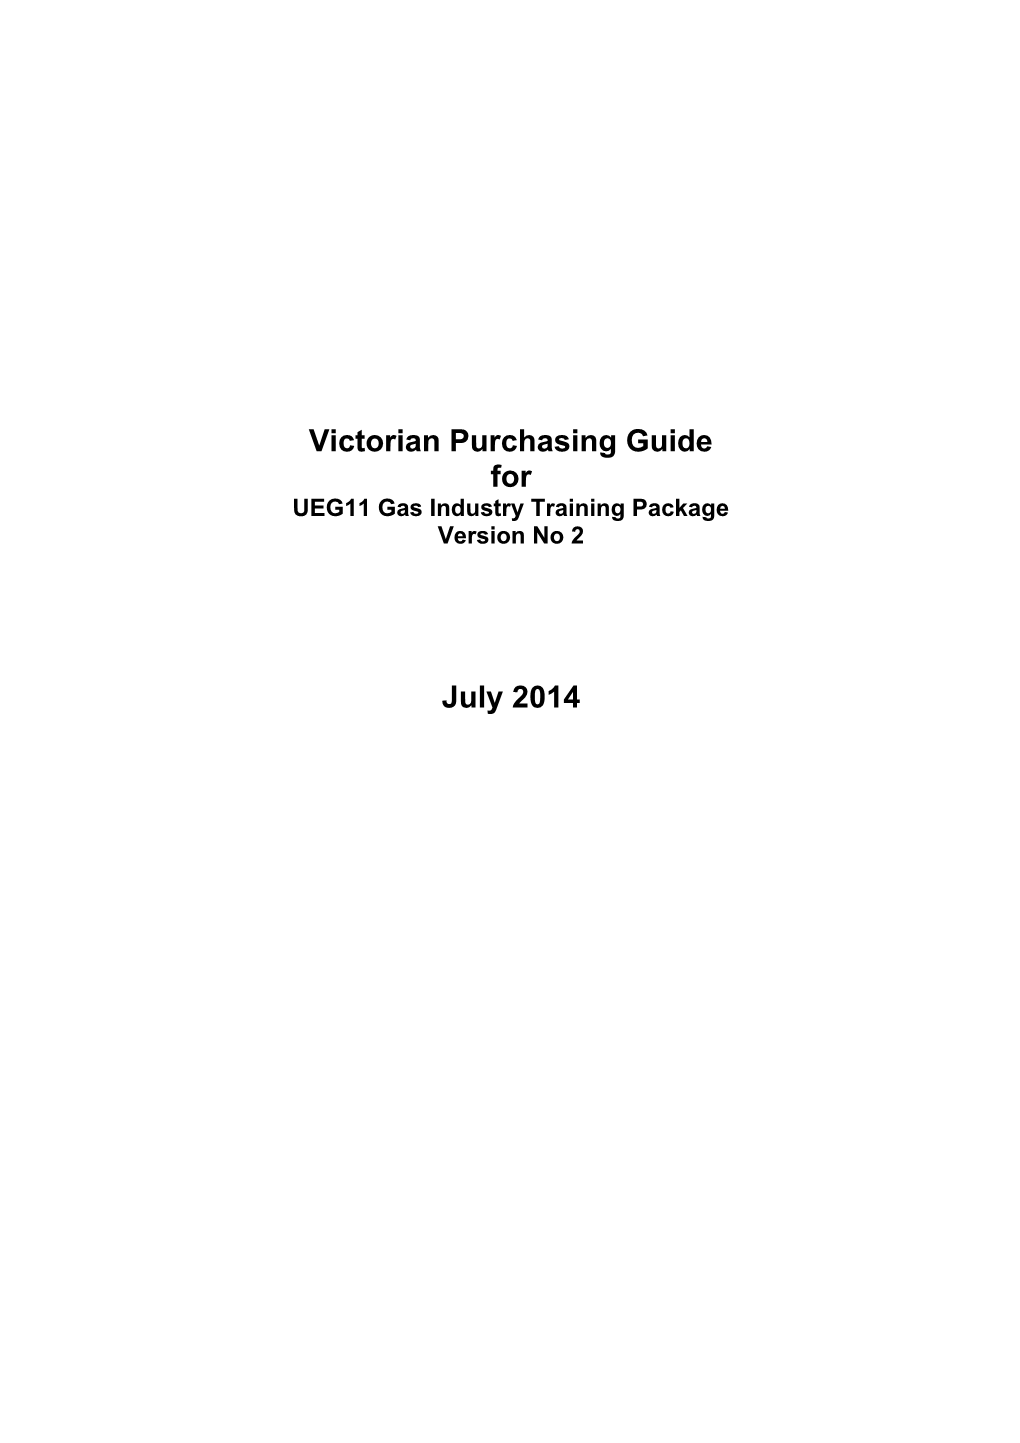 Victorian Purchasing Guide for UEG11 Gas Industry Version 2